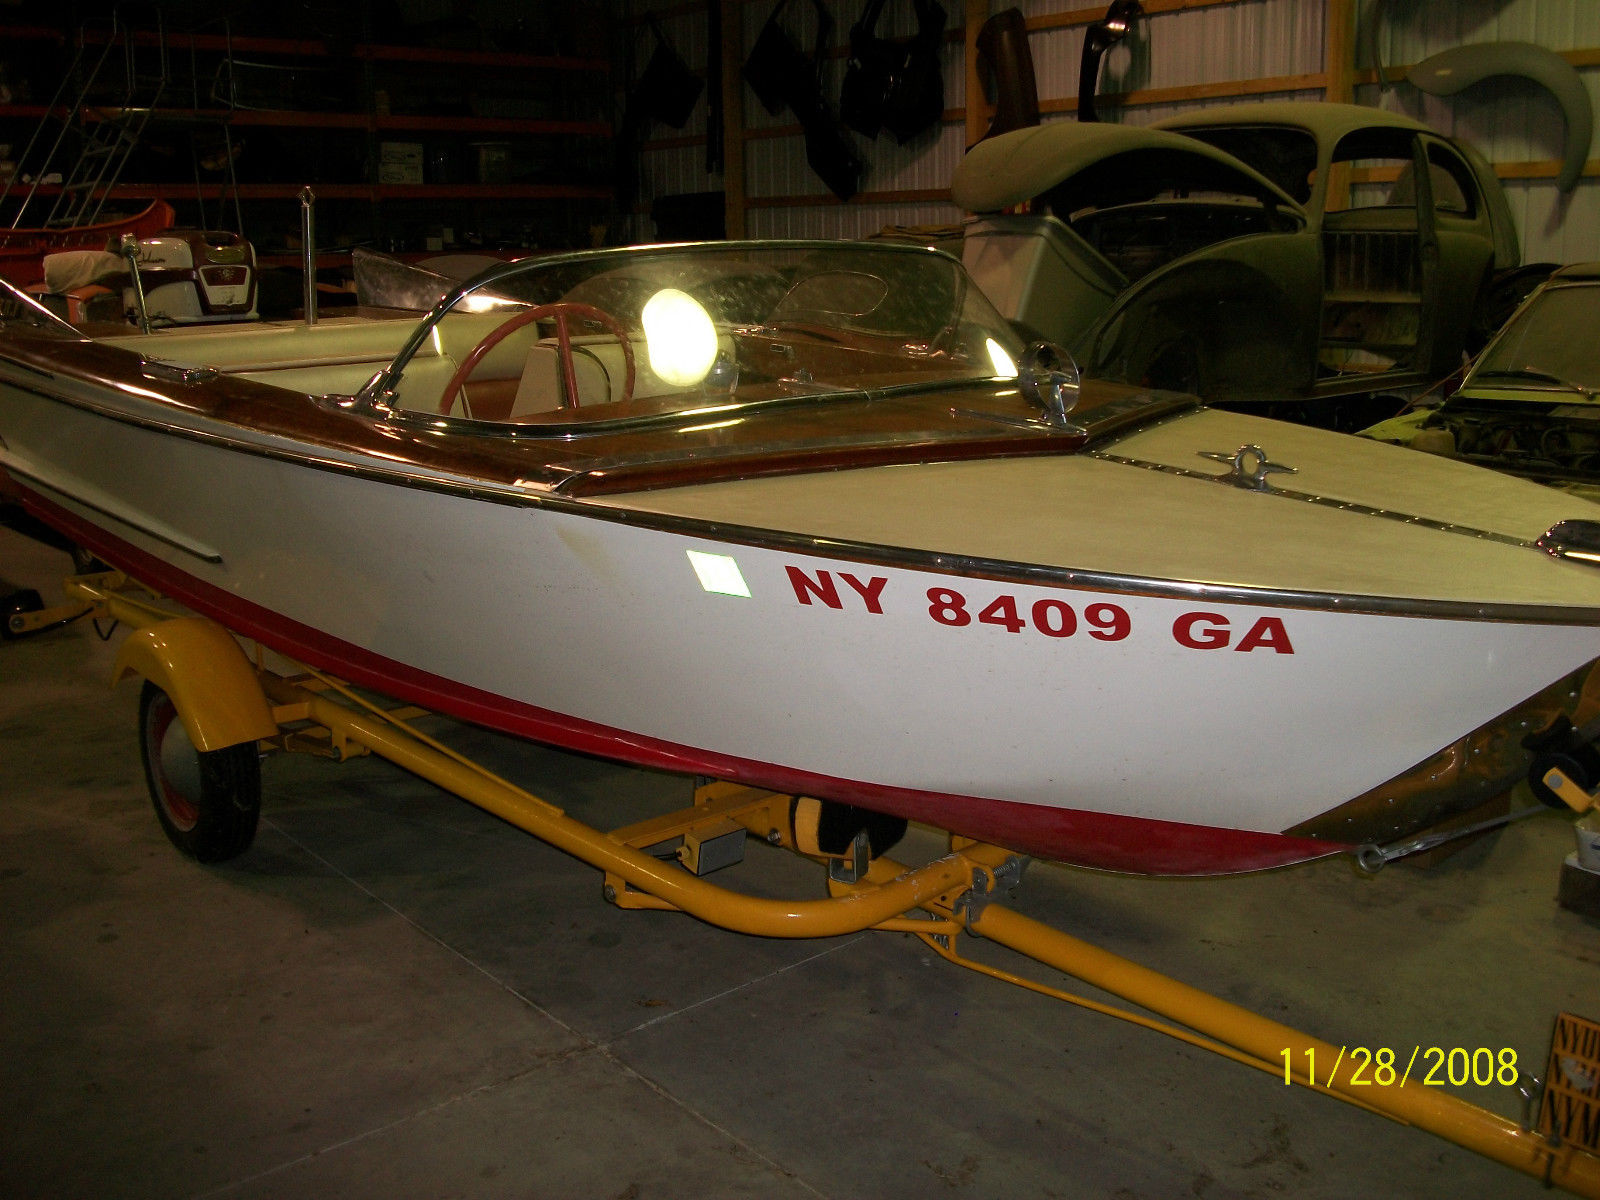 Owens Runabout 1957 for sale for $1,000 - Boats-from-USA.com